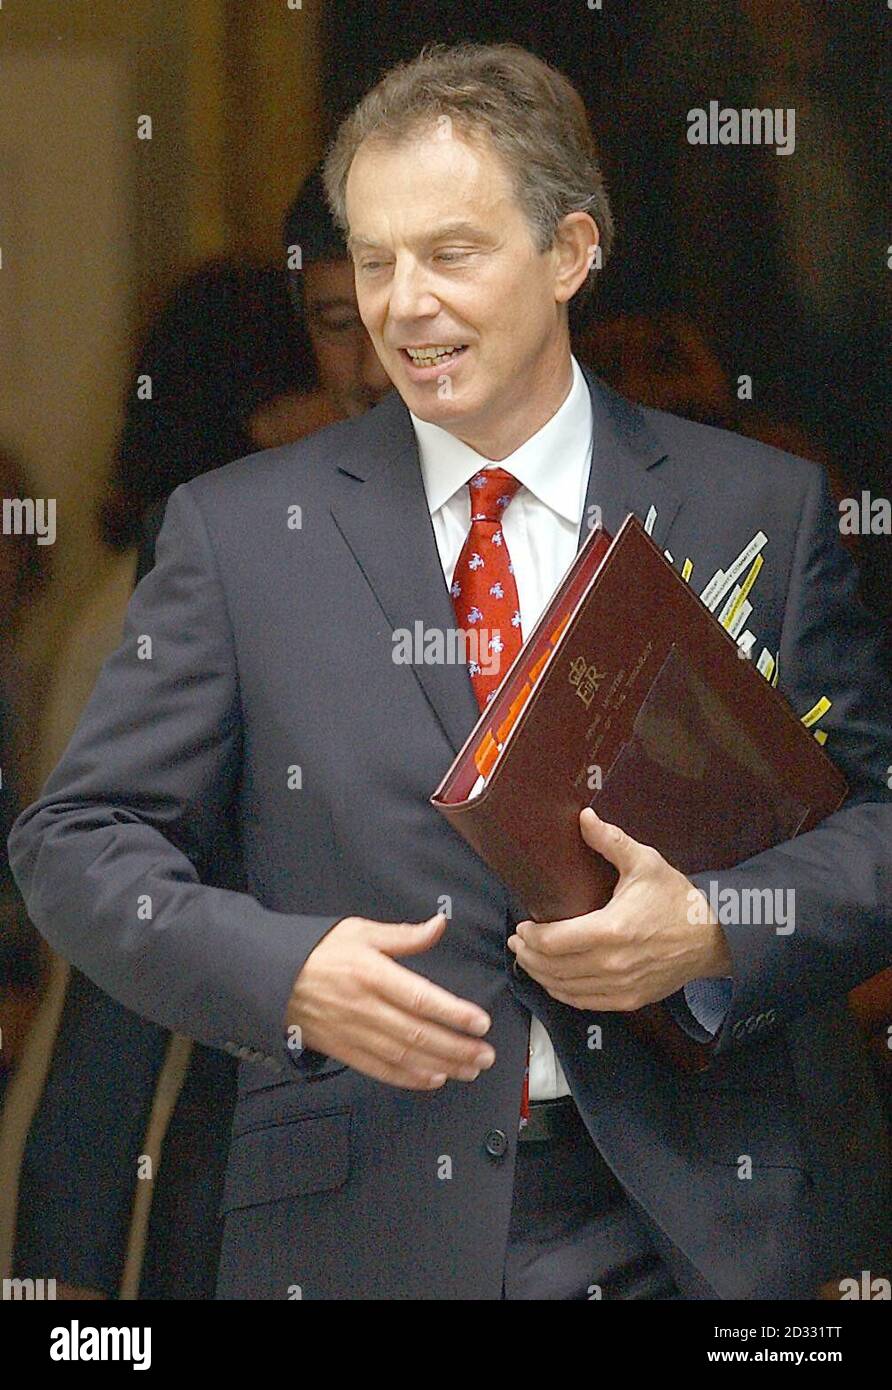 Britain's Prime Minister Tony Blair leaves his offices in Downing Street, to travel to the House of Commons for his regular weekly session of questions from members of parliament.   *  Amongst other matters, he is expected to be quizzed over allegations that the Government exaggerated the threat of Iraq's weapons of mass destruction. Stock Photo